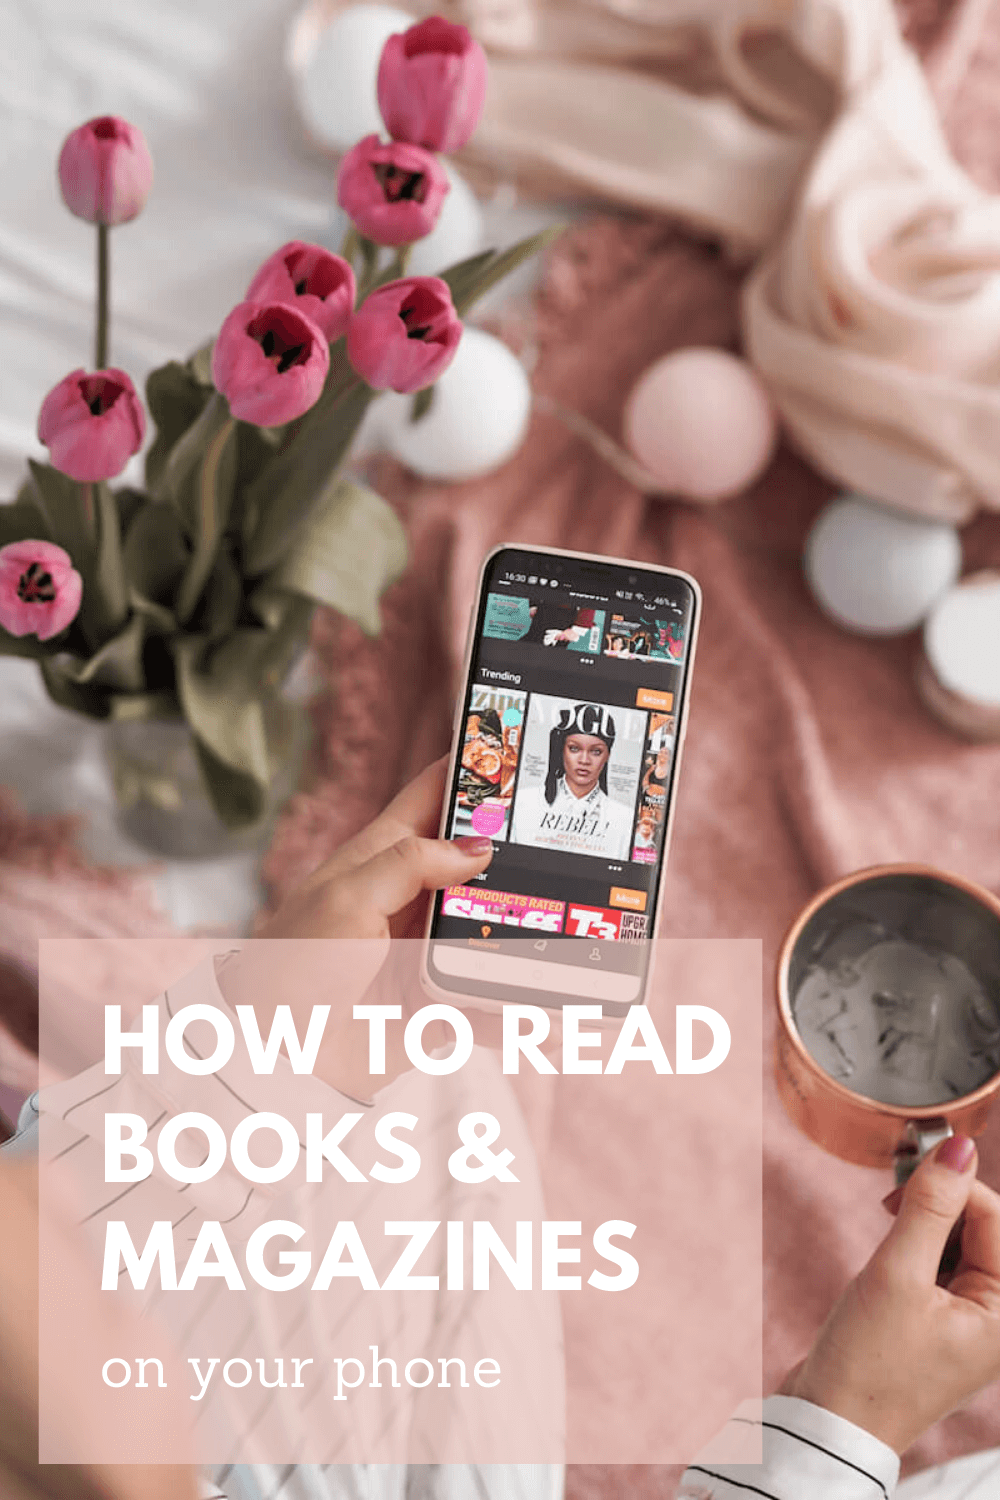 How to read books & magazines online for less